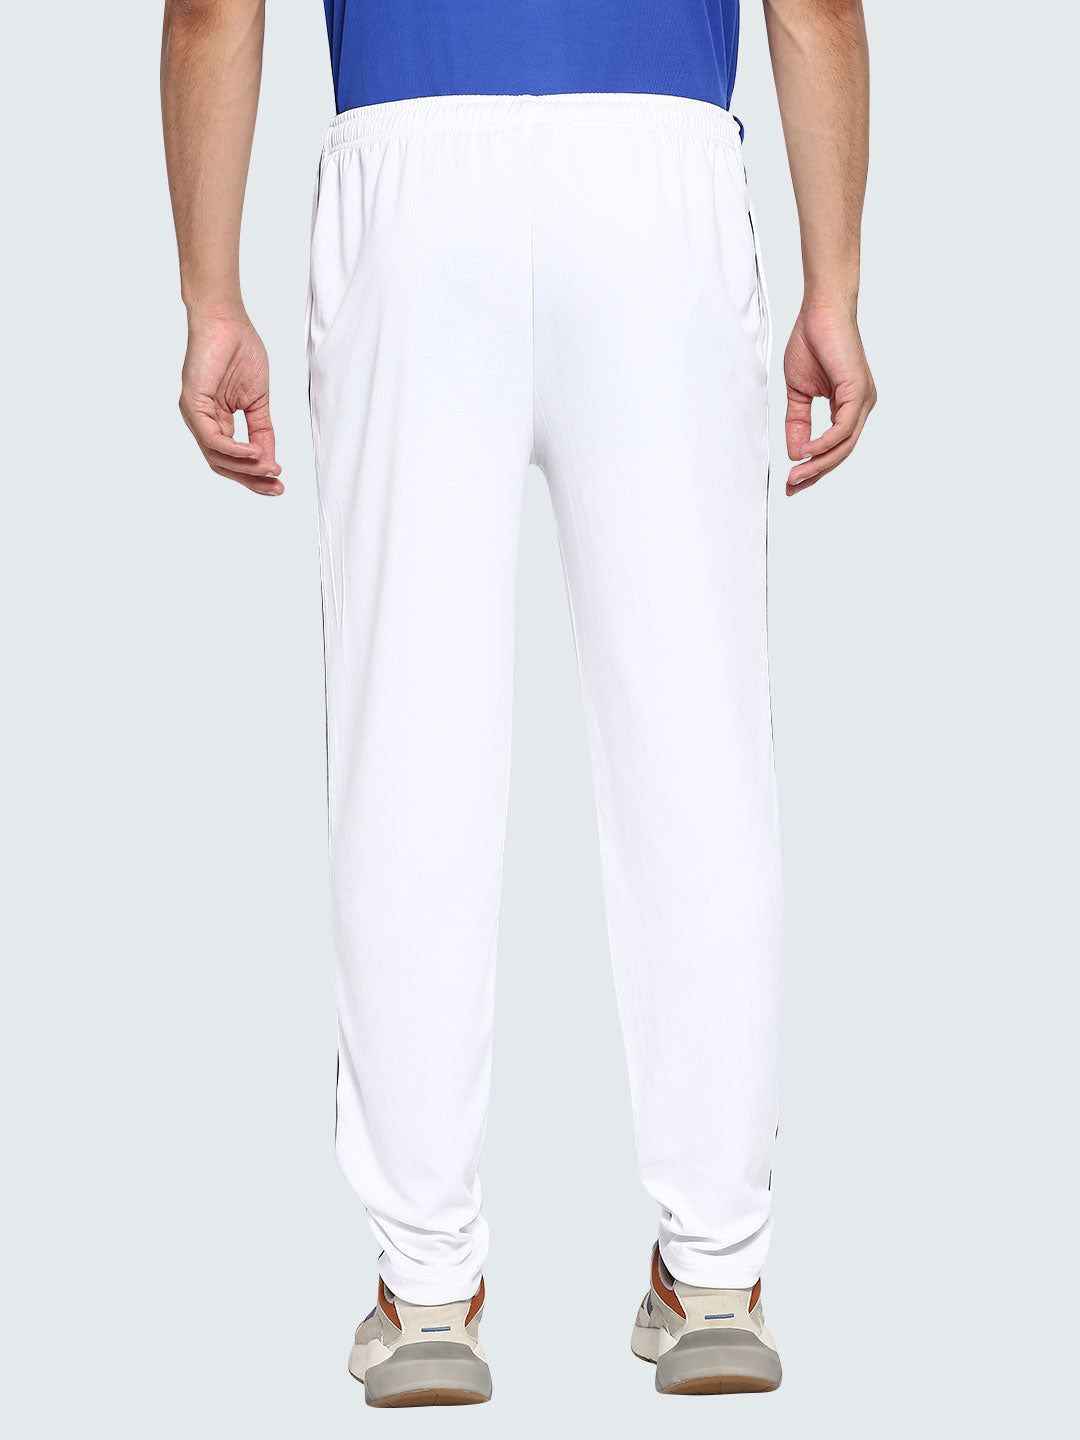 Men's Cricket Whites Trackpant 1 - Front